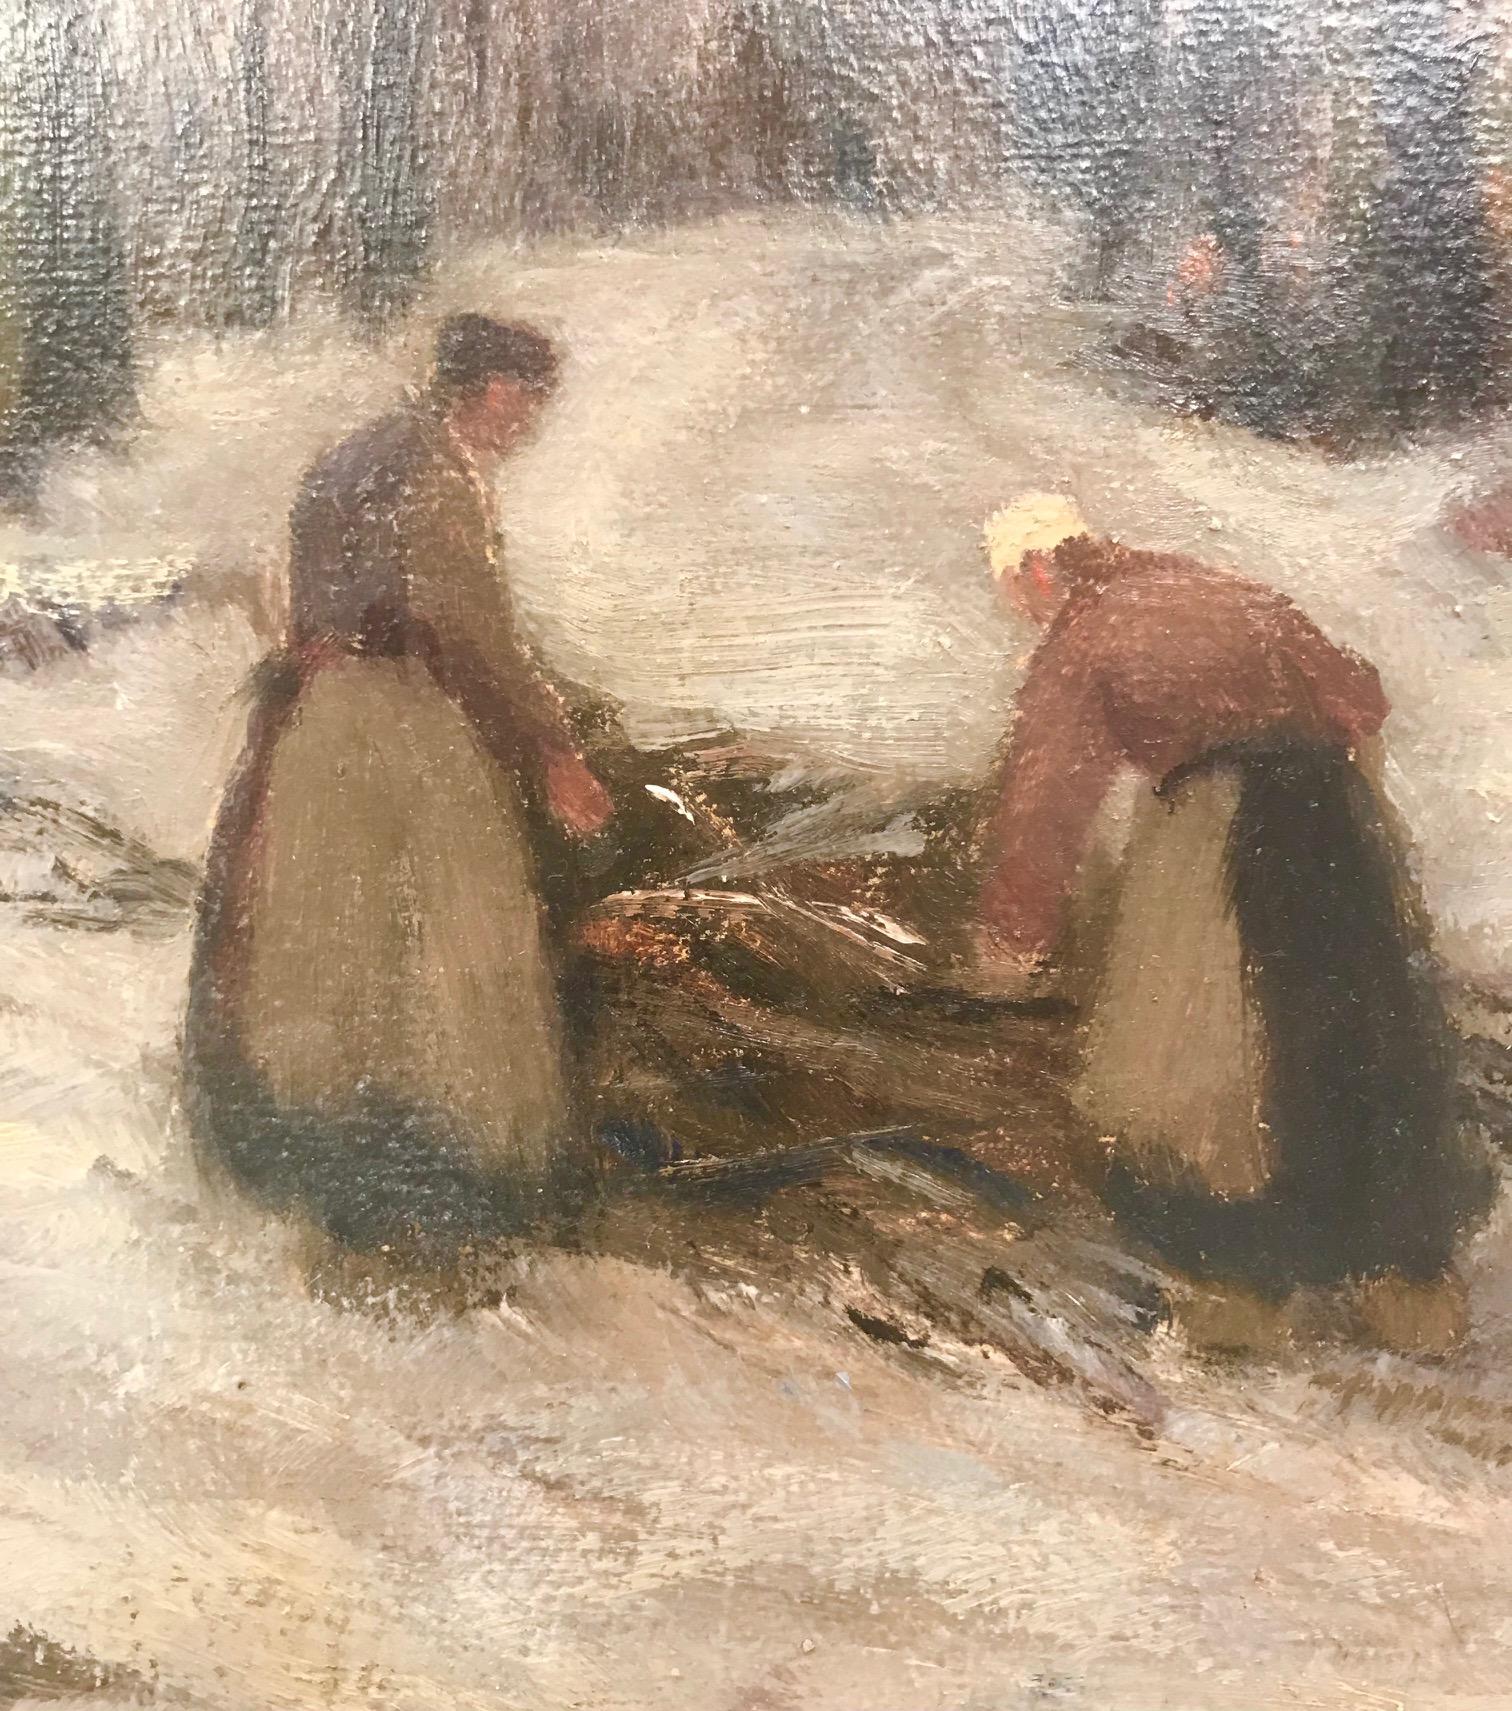 Artist: Heinrich Weckauf  (1885 -1963) German
Title: Gathering Wood in Winter
Dimensions: Framed 19.5 x 23.5 inches, Unframed 16.5 x 20.5 

Weckauf’s oil painting of a winter landscape in Germany captures the cold, bleak days of winter. Although